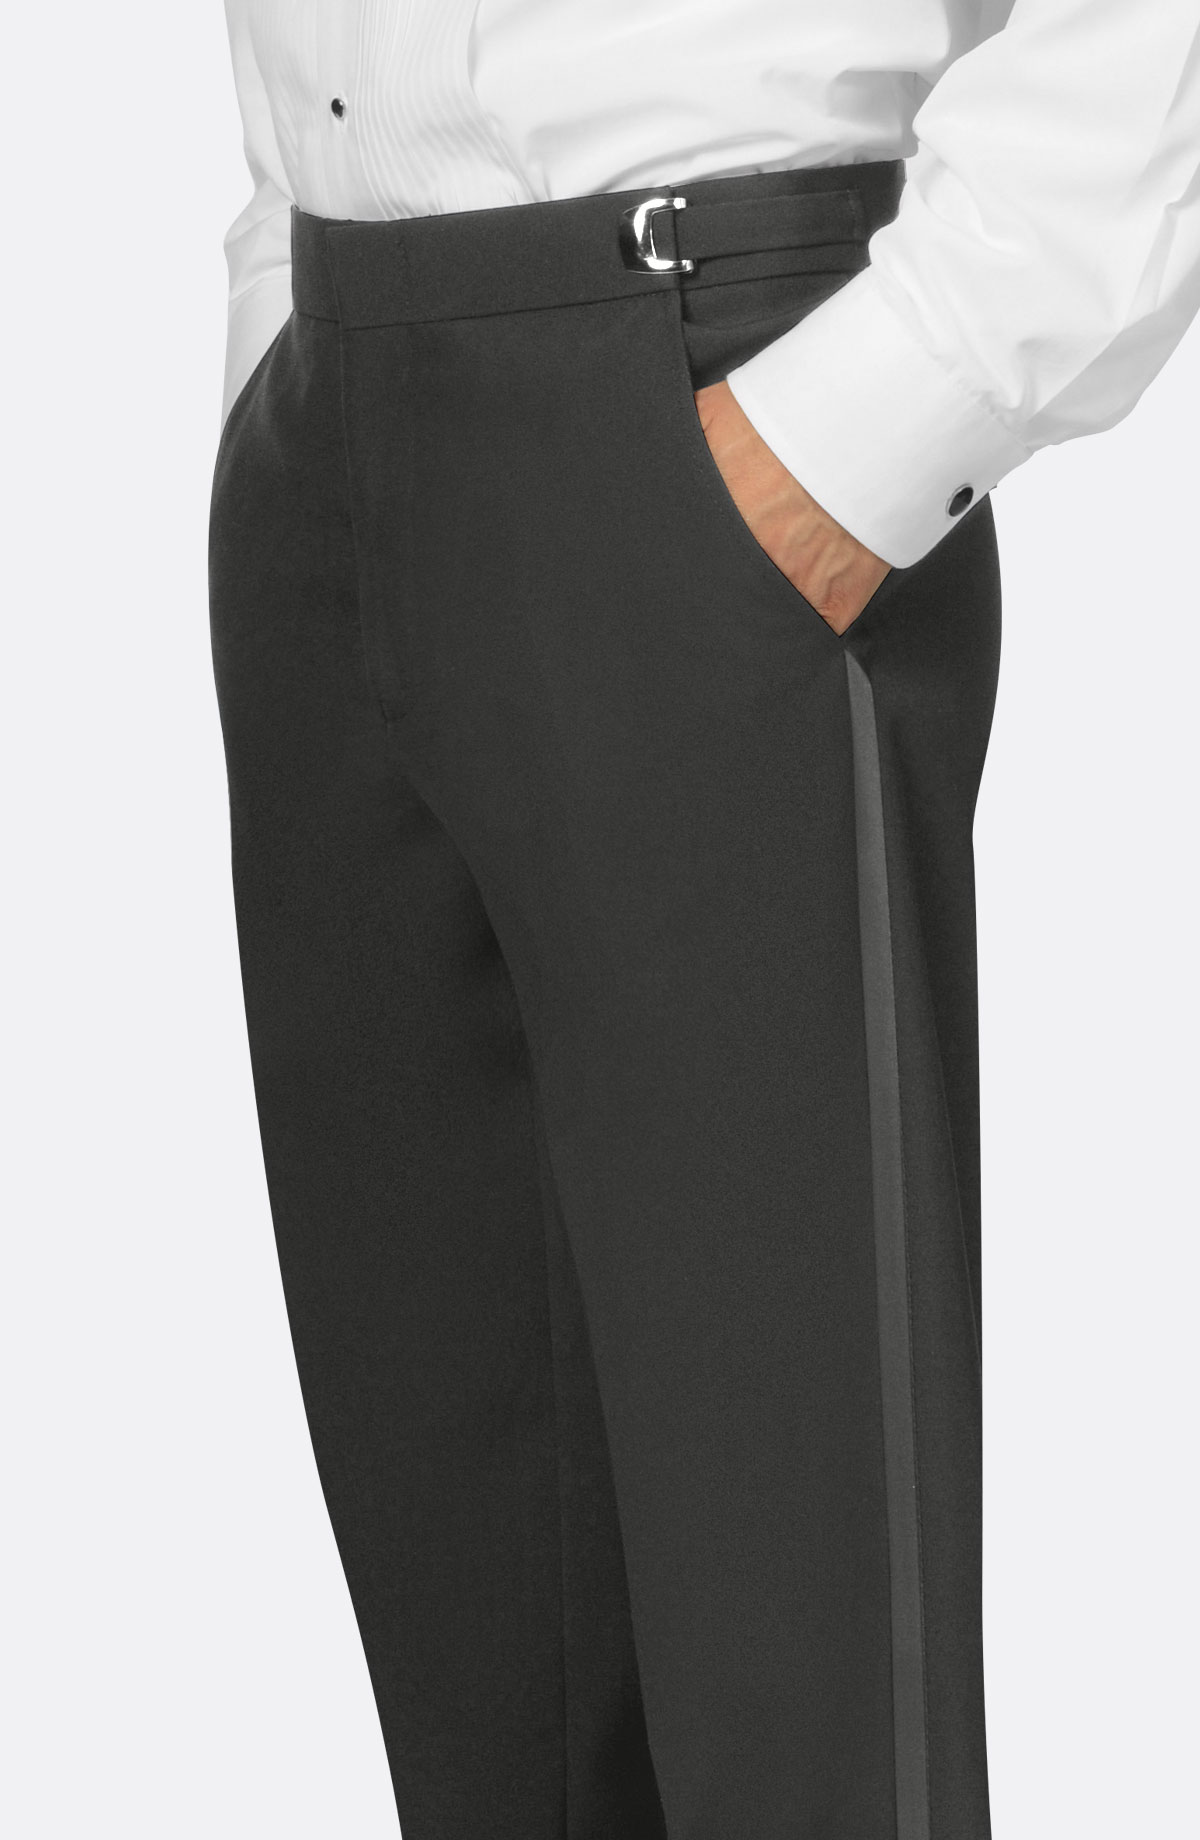 Men's Pants Tuxedos and Formal Wear